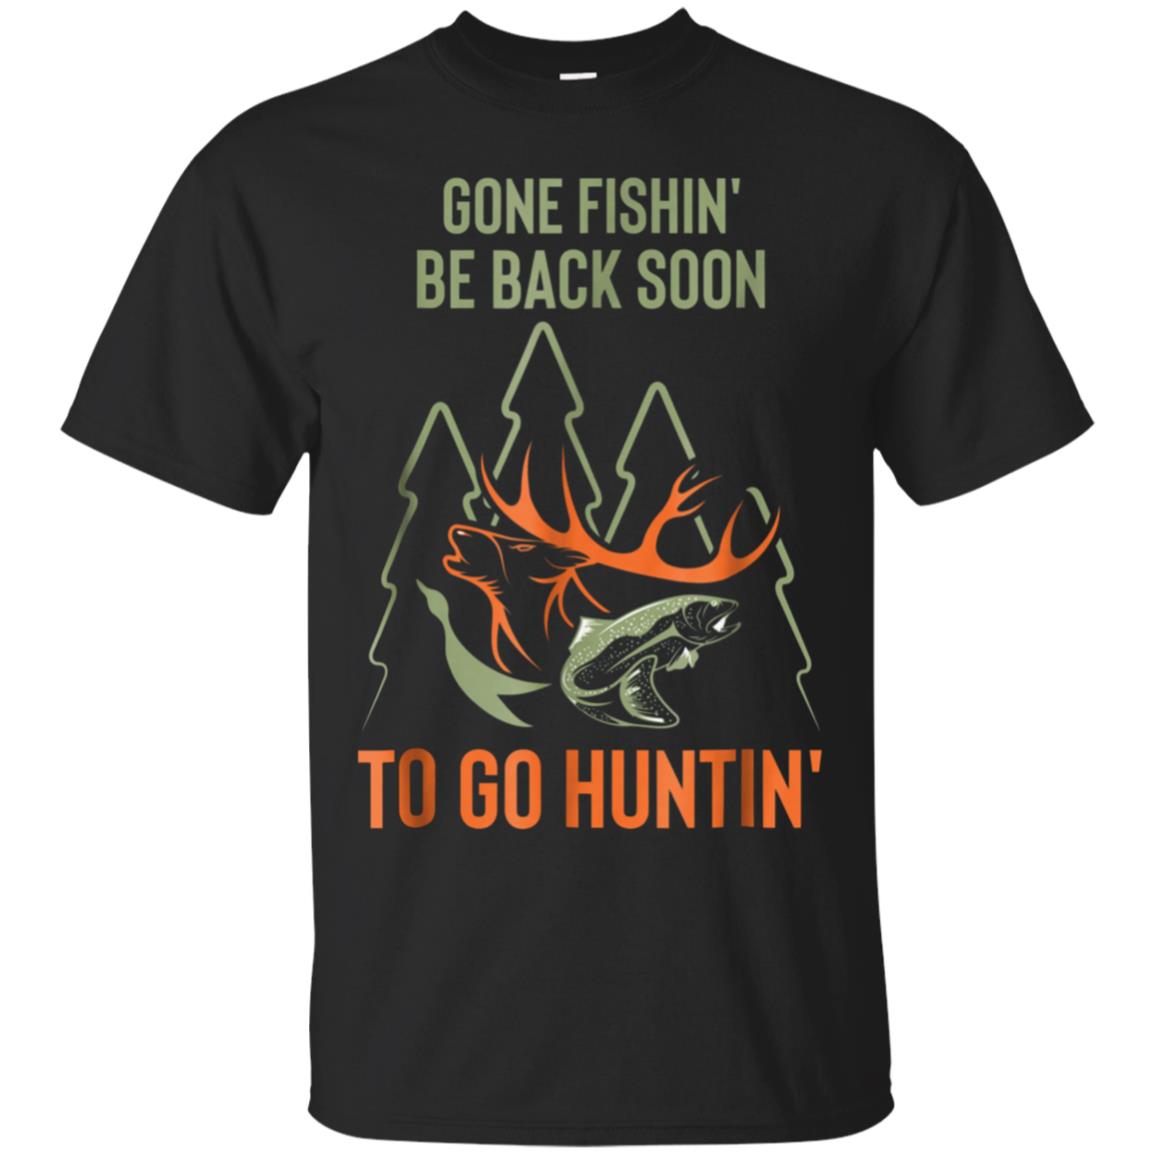 Fishing & Hunting T-shirt Gift For Hunters Who Love To Hunt